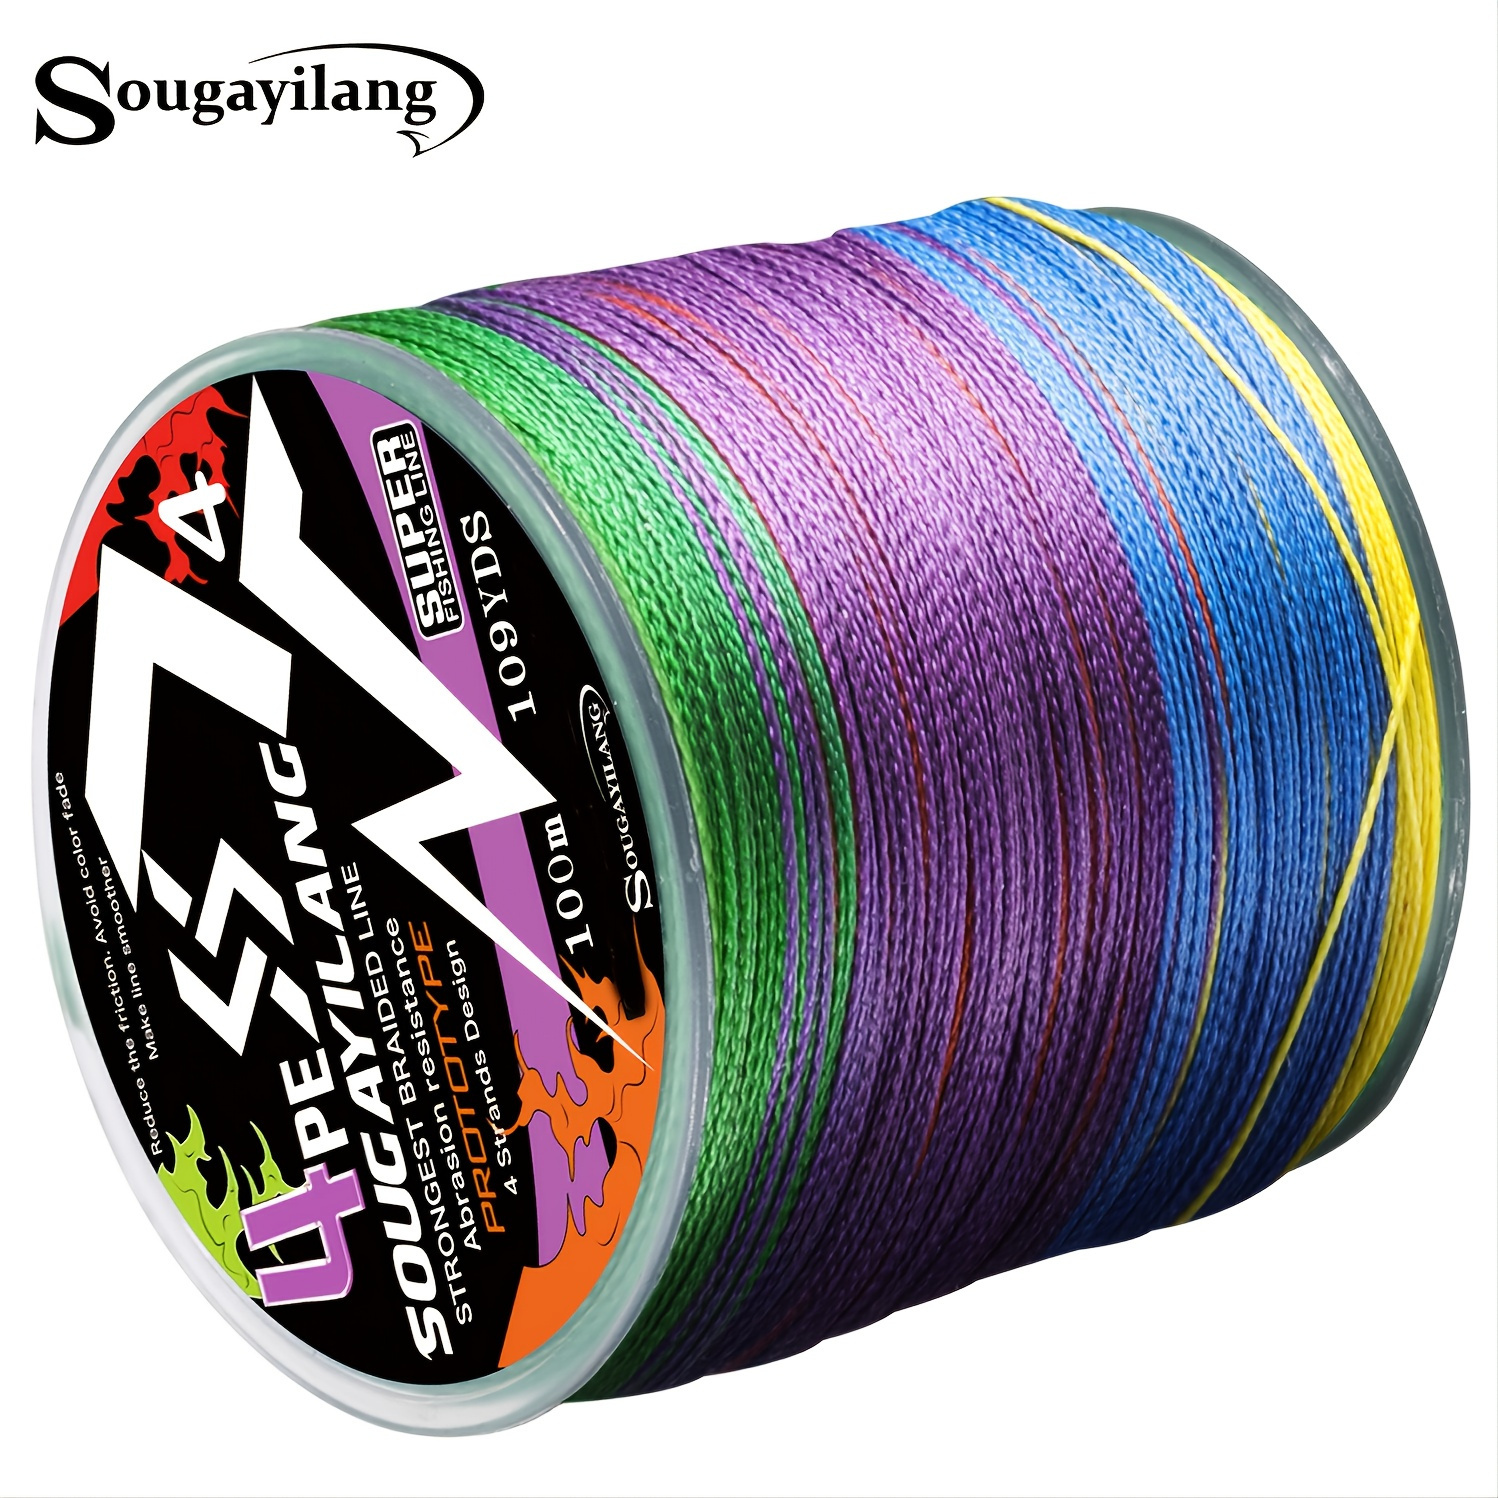 Sougayilang 4 Strands PE Braided Fishing Line - Strong, Durable, and  Long-Lasting - Available in 109yds, 328yds, and 546yds